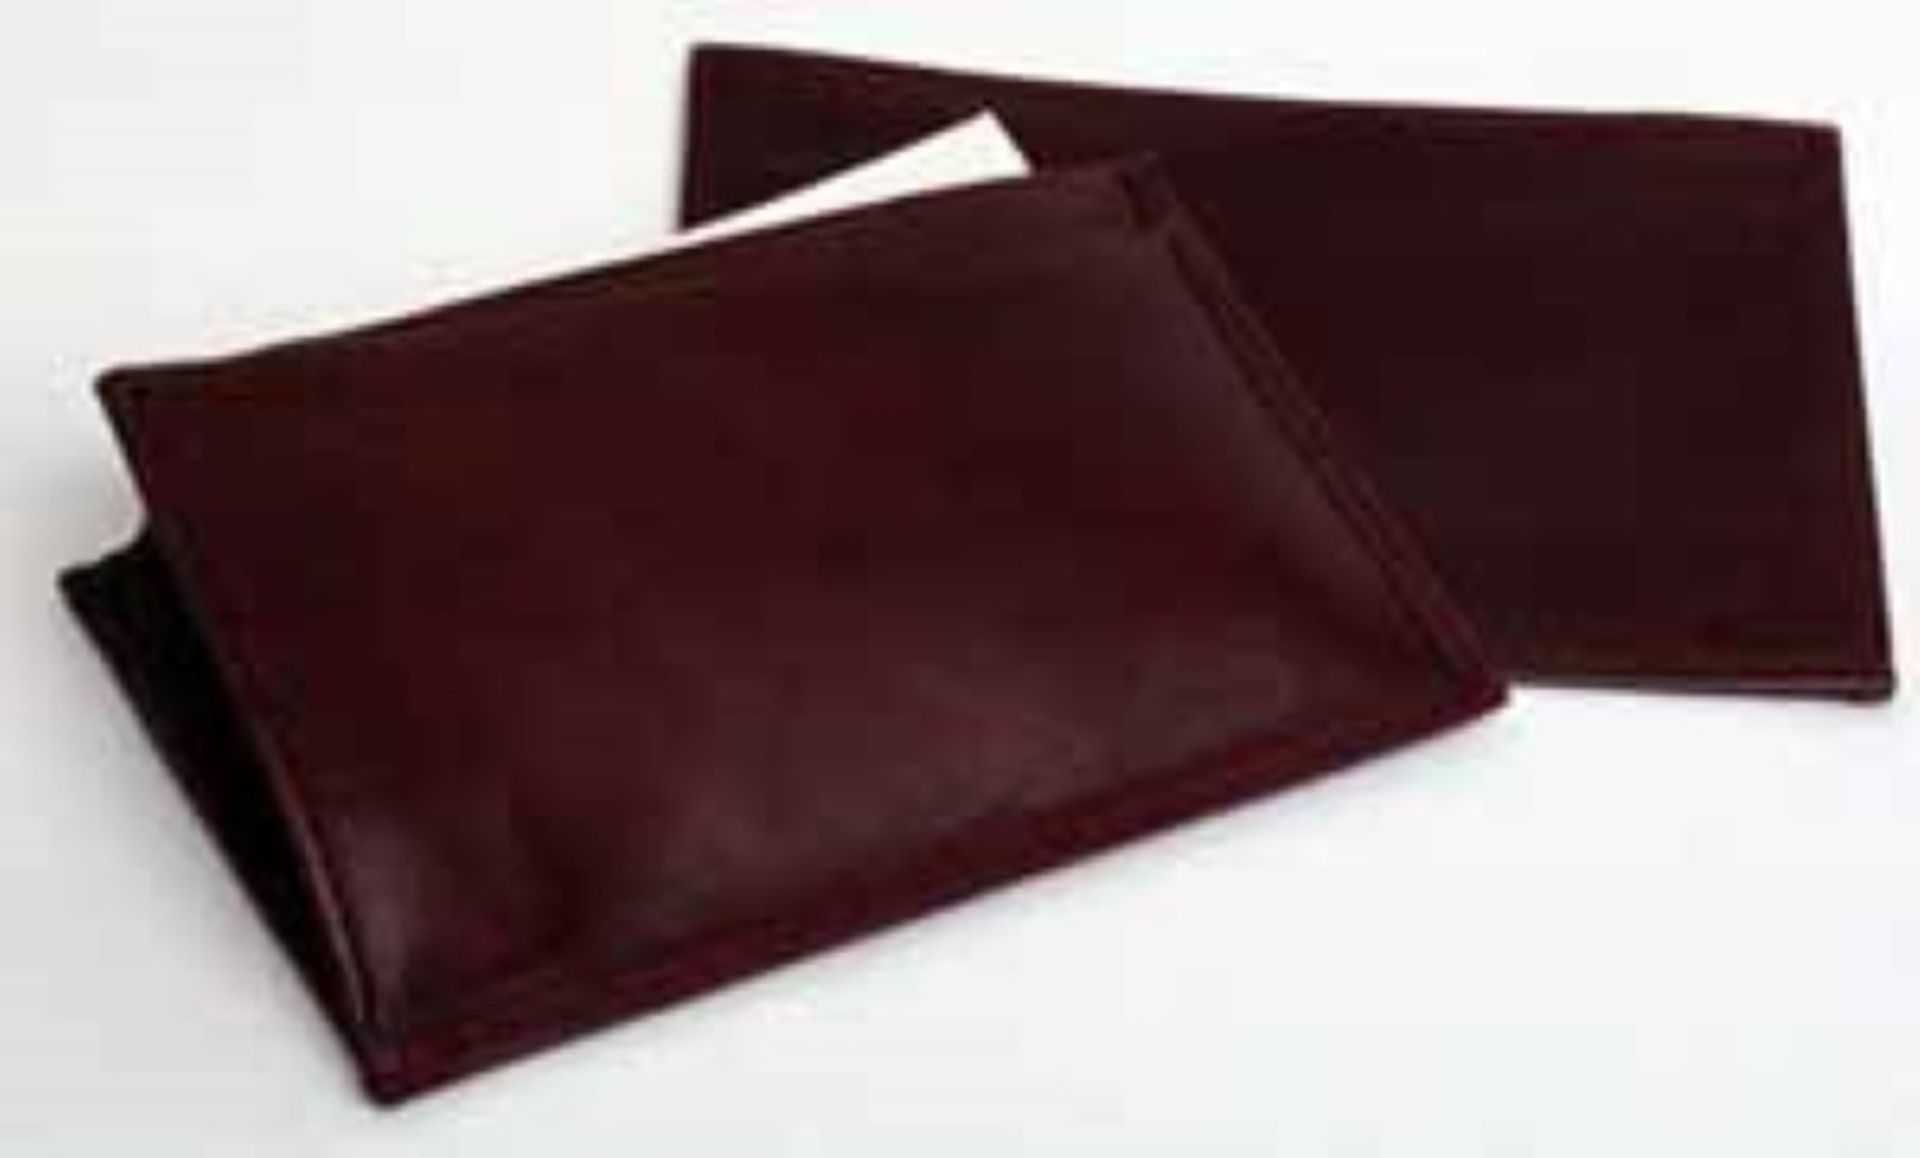 (72) Folded edge, expander card case made of genuine top grain leather. Twopockets include a flat